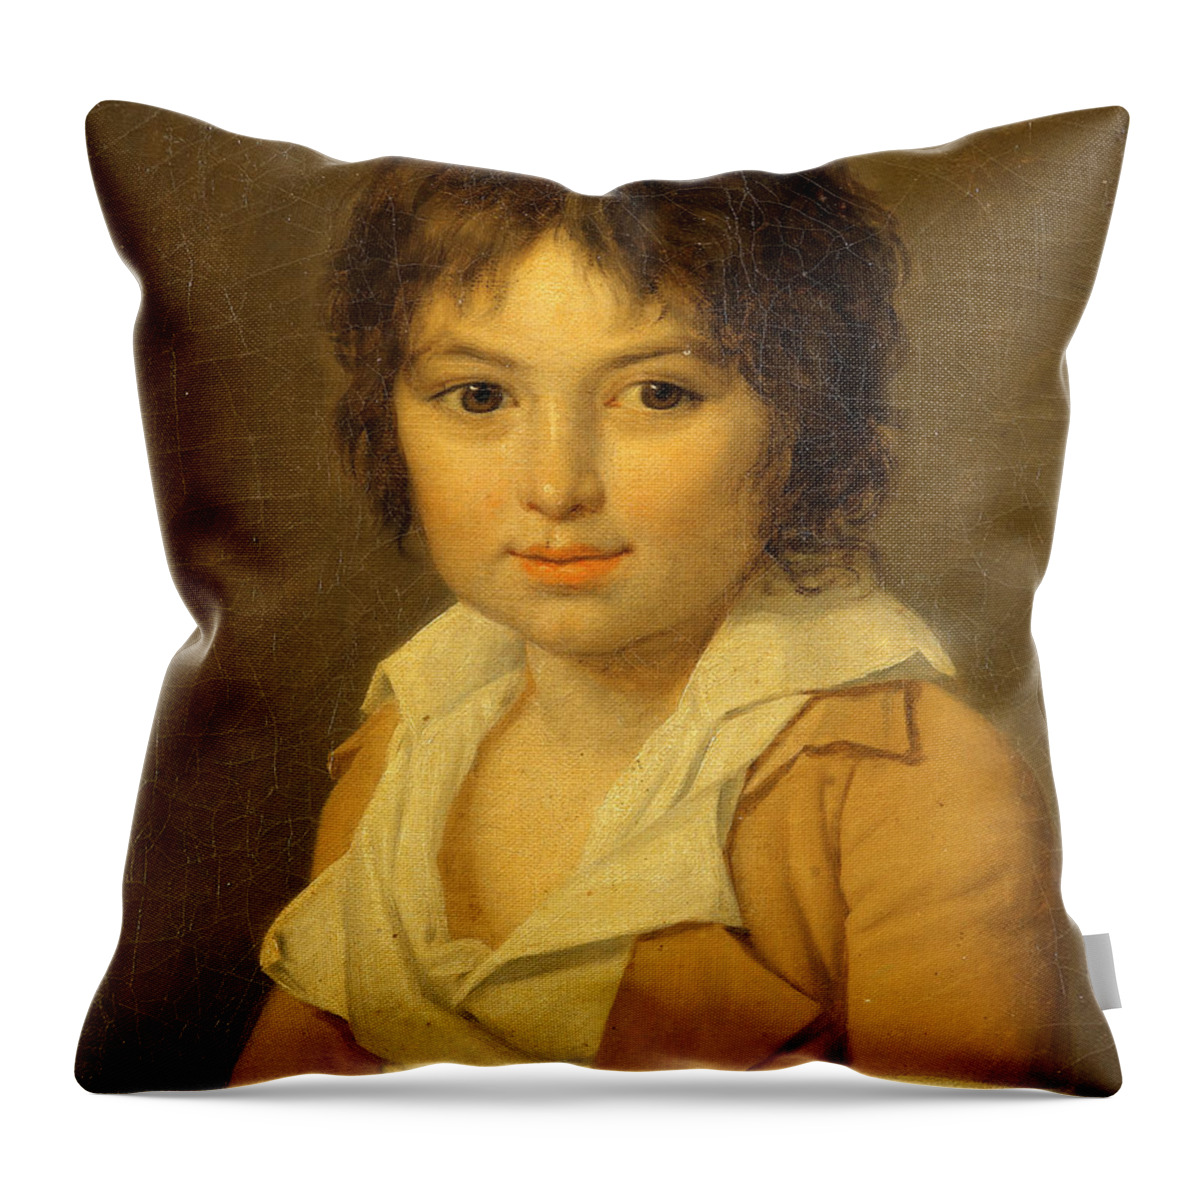 Jean-louis Laneuville Throw Pillow featuring the painting Portrait of Amedee Selim de Robillard Peronville by Jean-Louis Laneuville